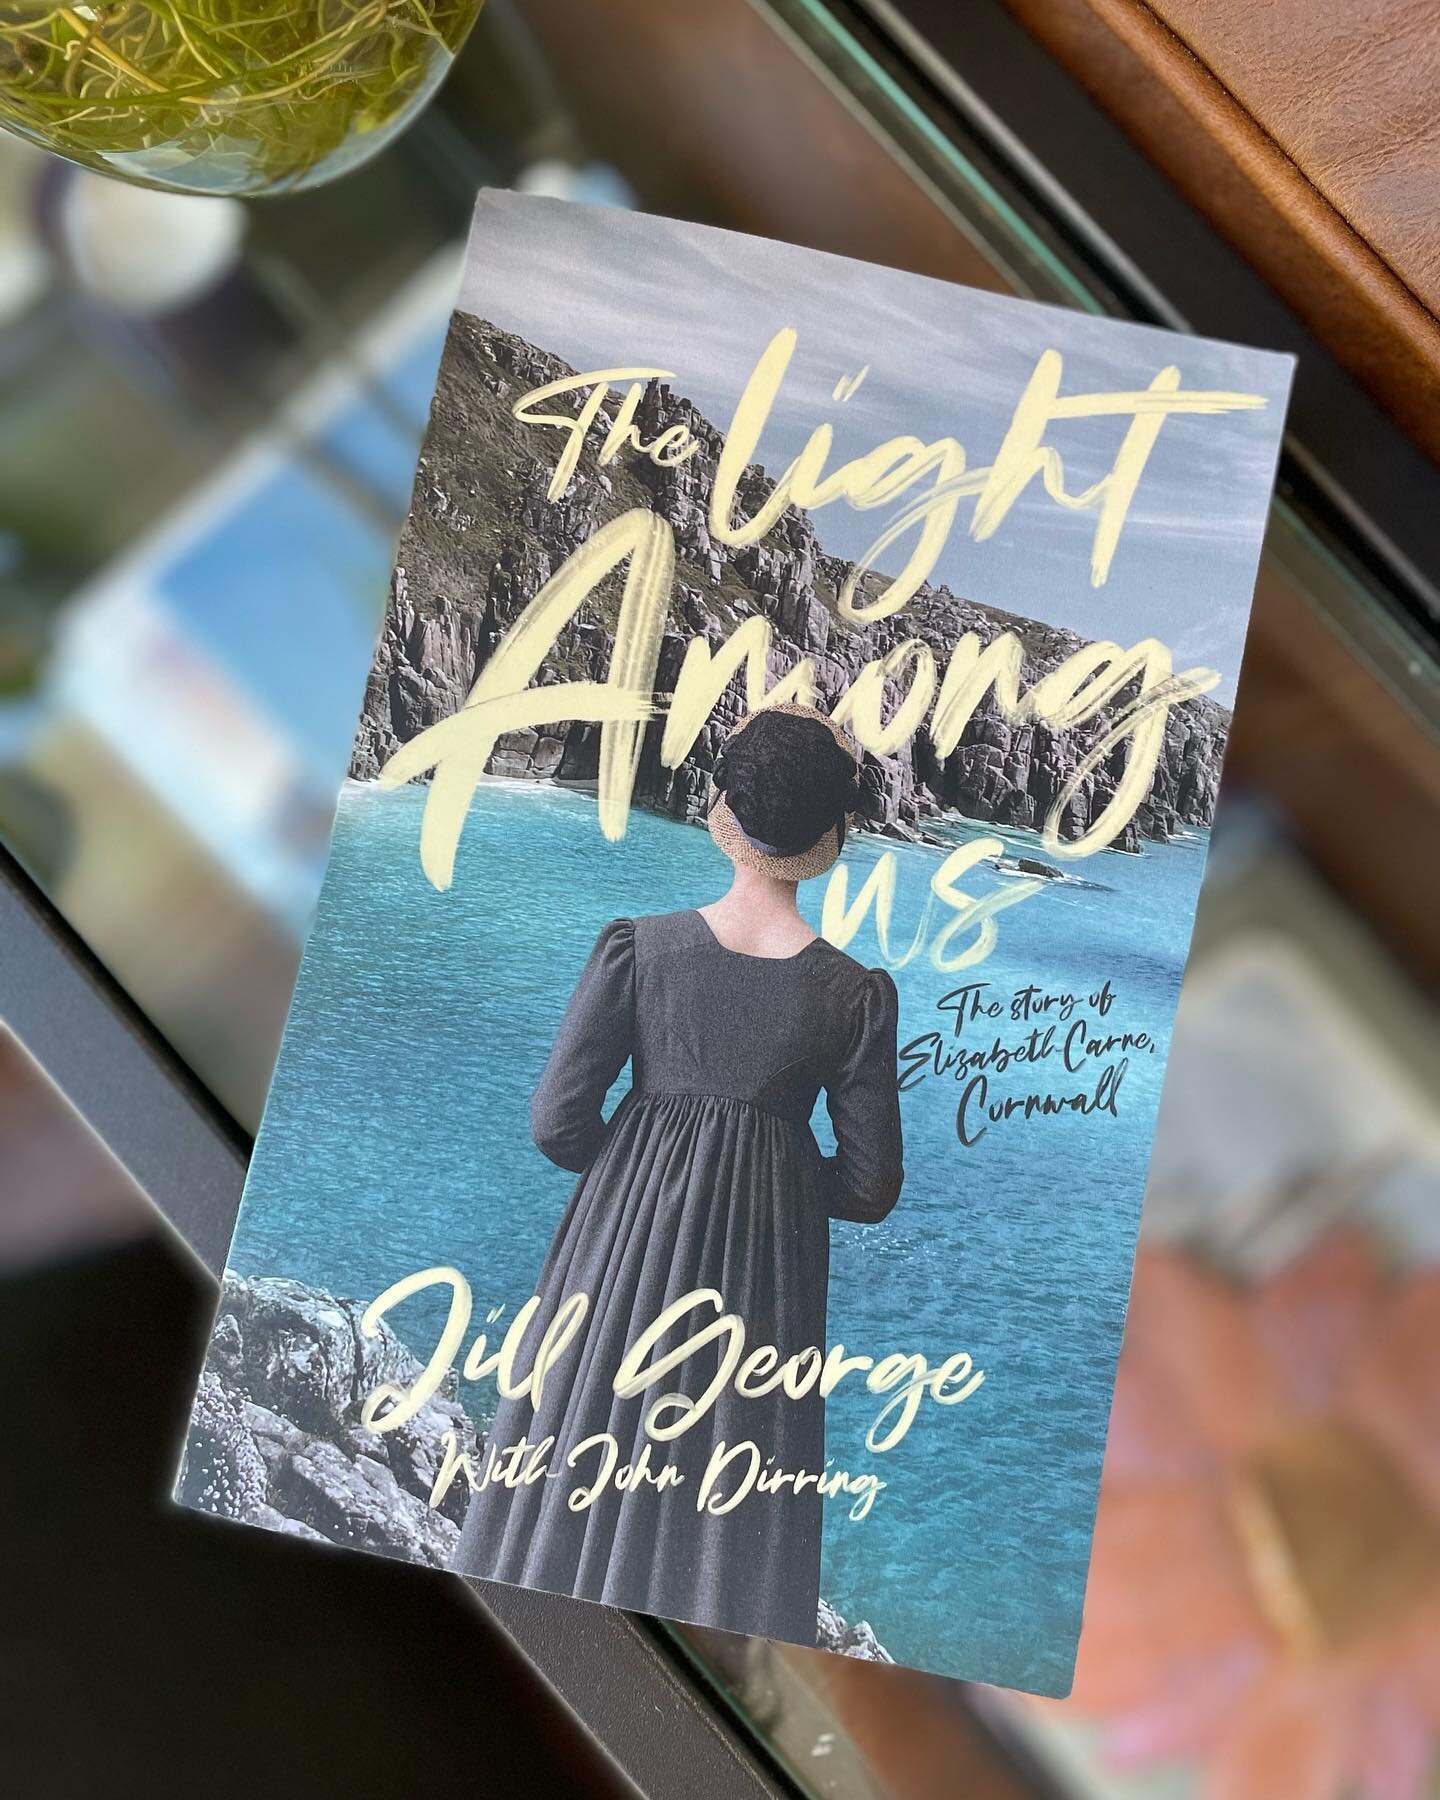 I&rsquo;m so proud of my dear friend @jillgeorgeauthor and her new book, The Light Among Us, about a strong and remarkable woman, Elizabeth Carne, who fought against classism and women&rsquo;s right in the 19th century. 

Jill is the type of person w